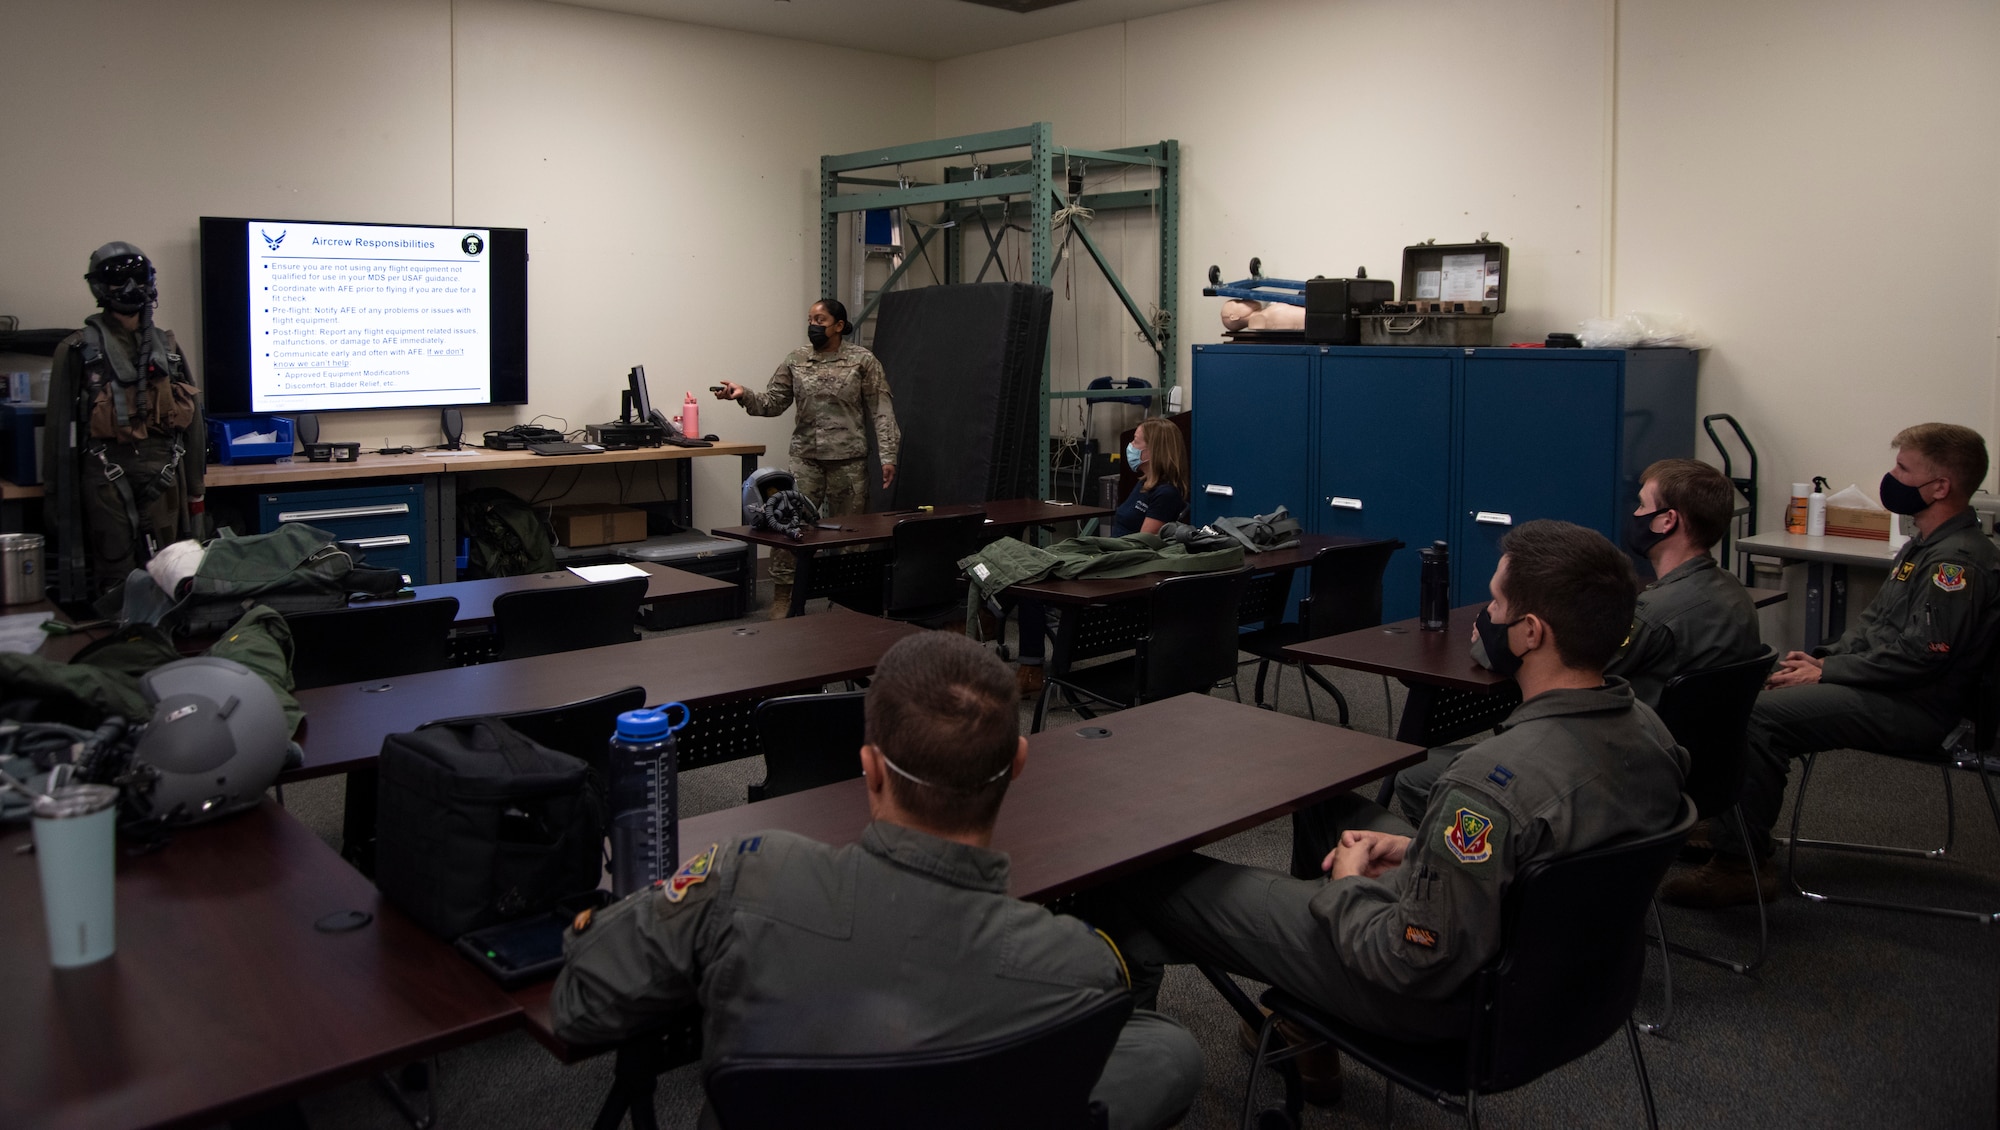 An Airman teaches a class about Aircrew Flight Equipment, with the Boise Mayor as a fellow student.